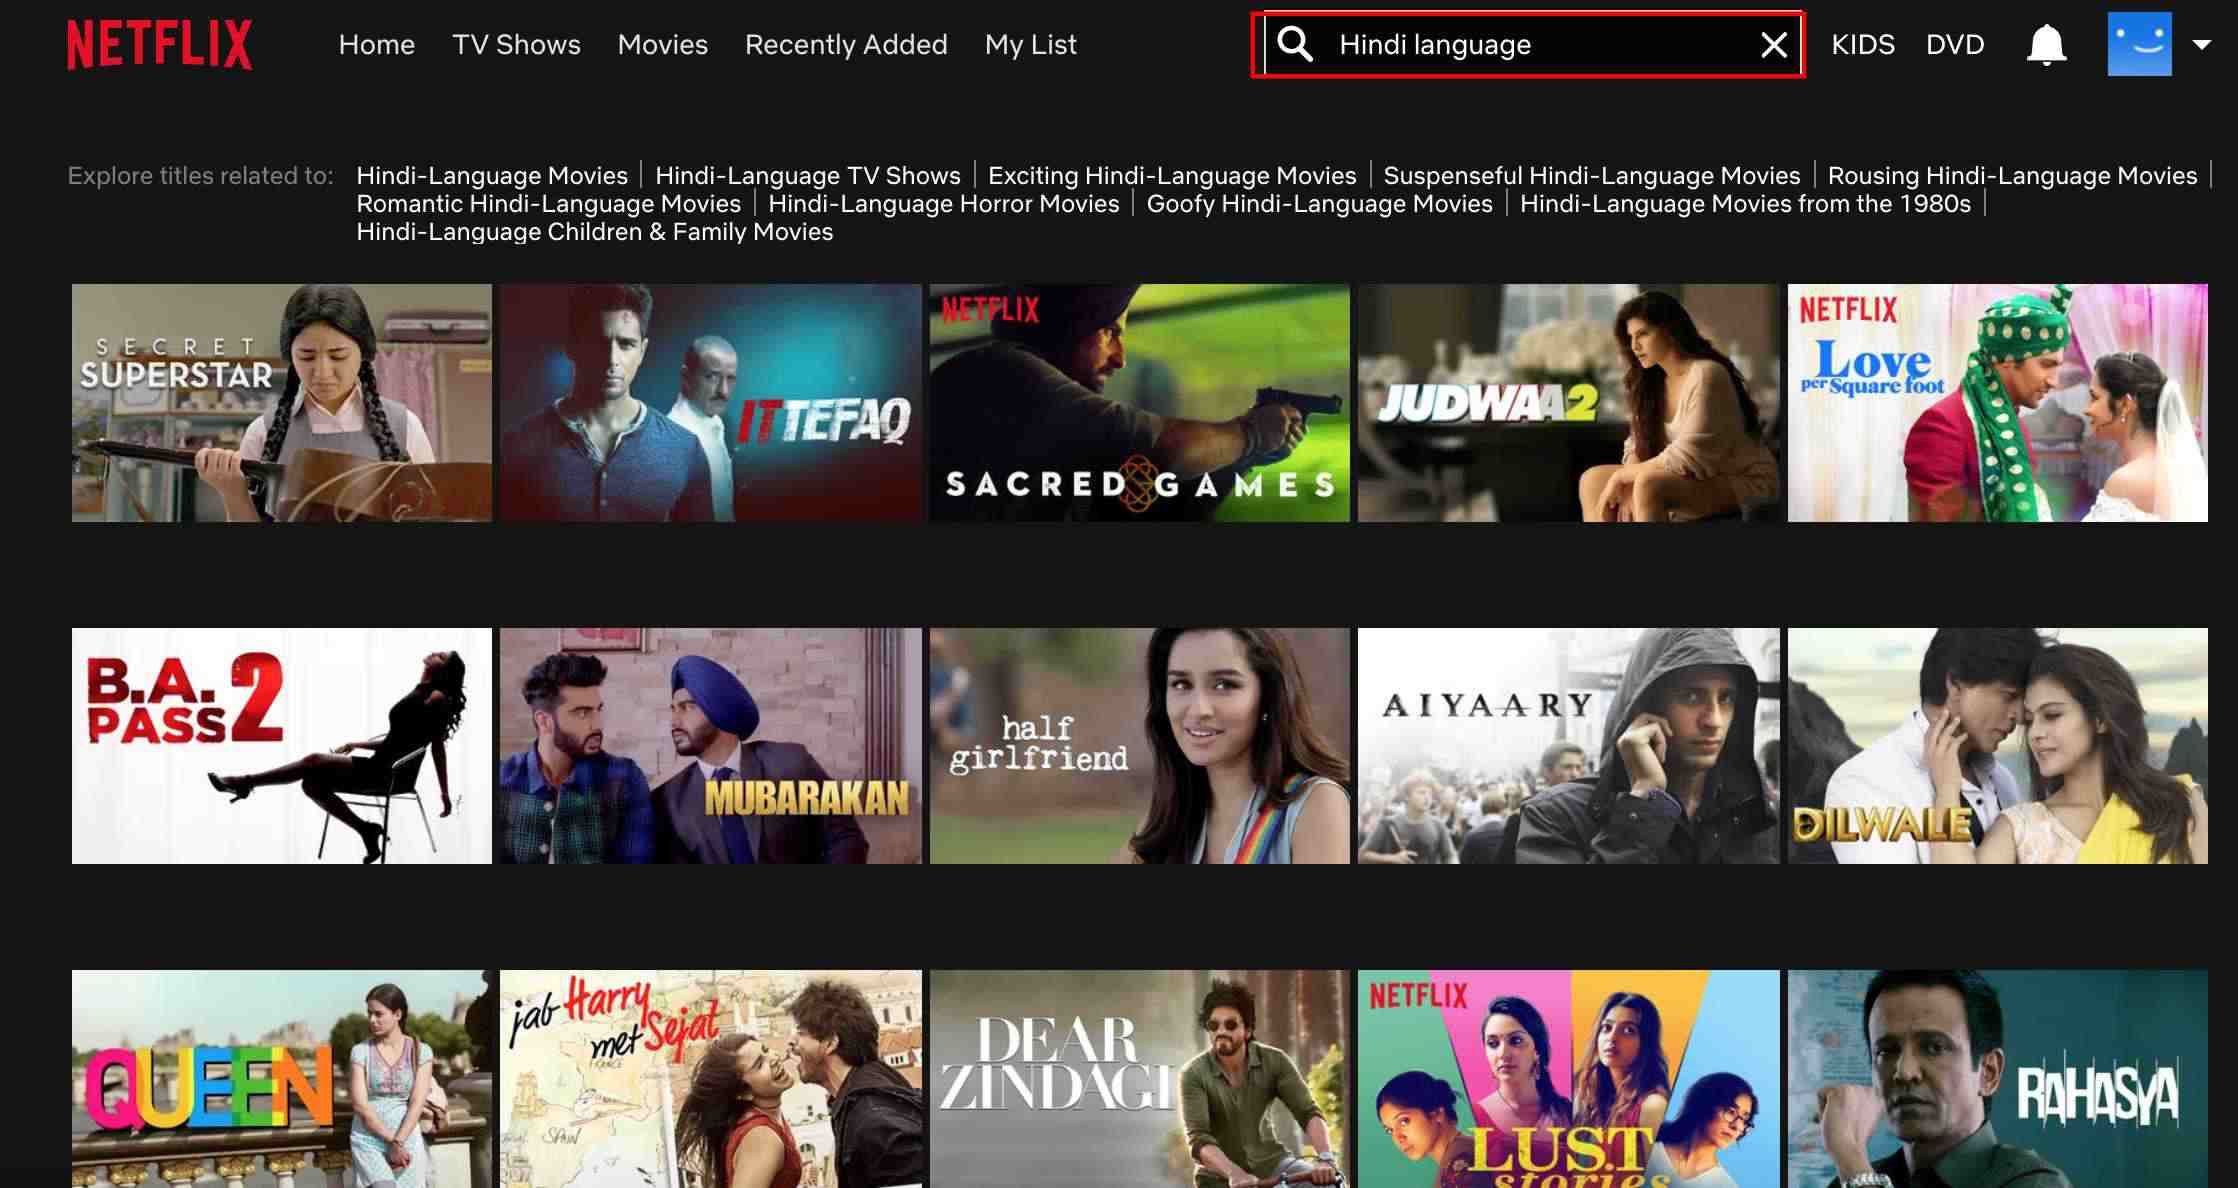 Netflix's search function shows multiple movies and shows.